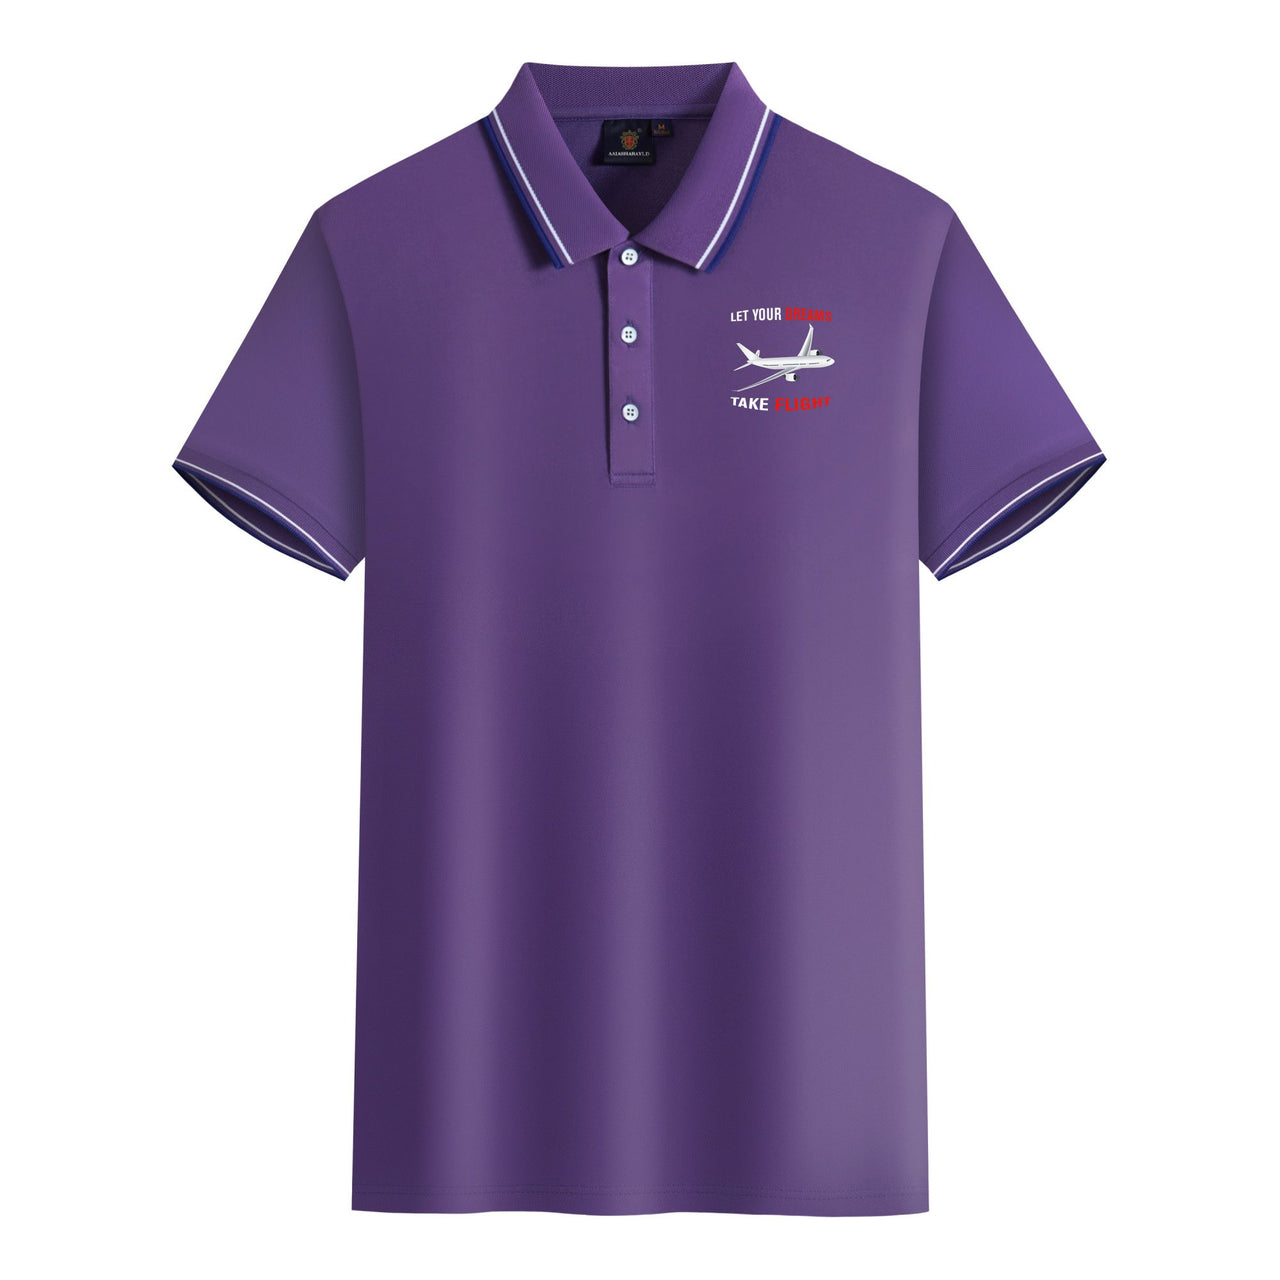 Let Your Dreams Take Flight Designed Stylish Polo T-Shirts